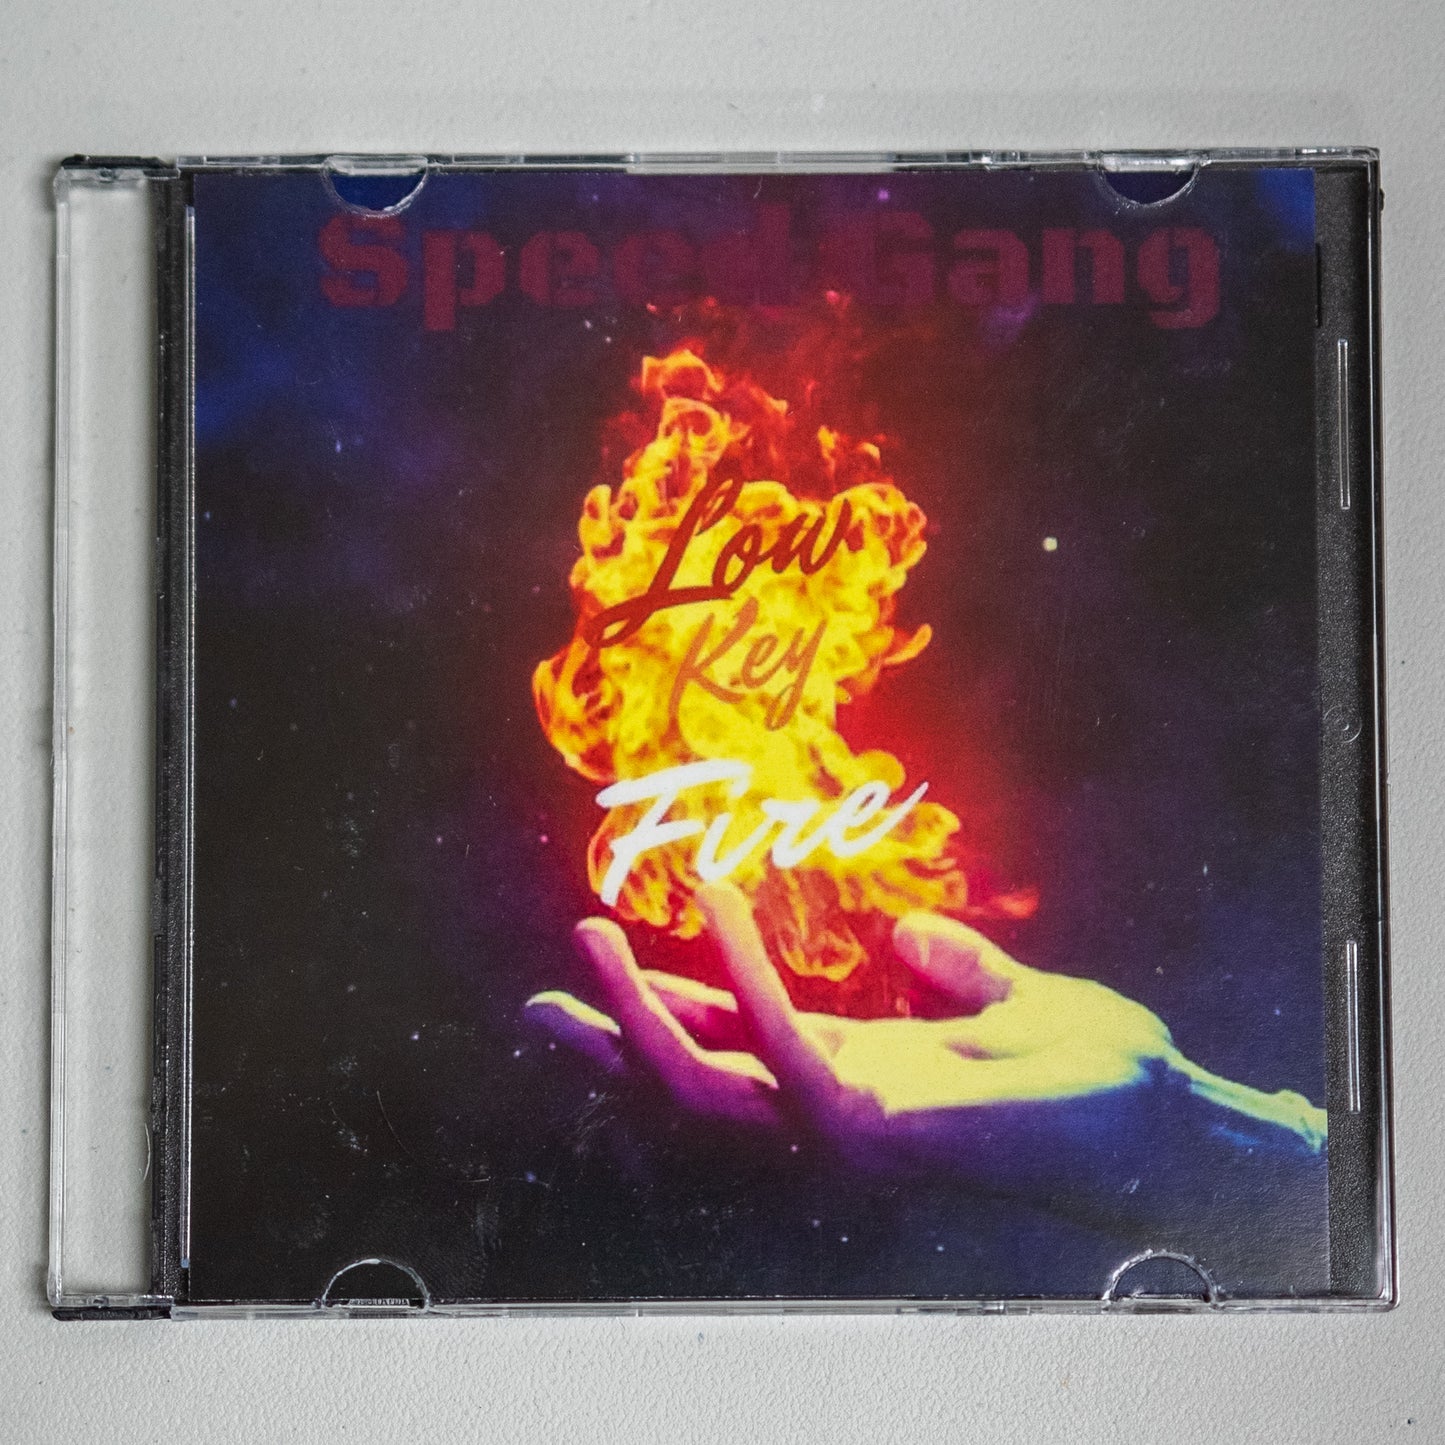 Speed Gang "Low Key Fire" [2016] Physical CD